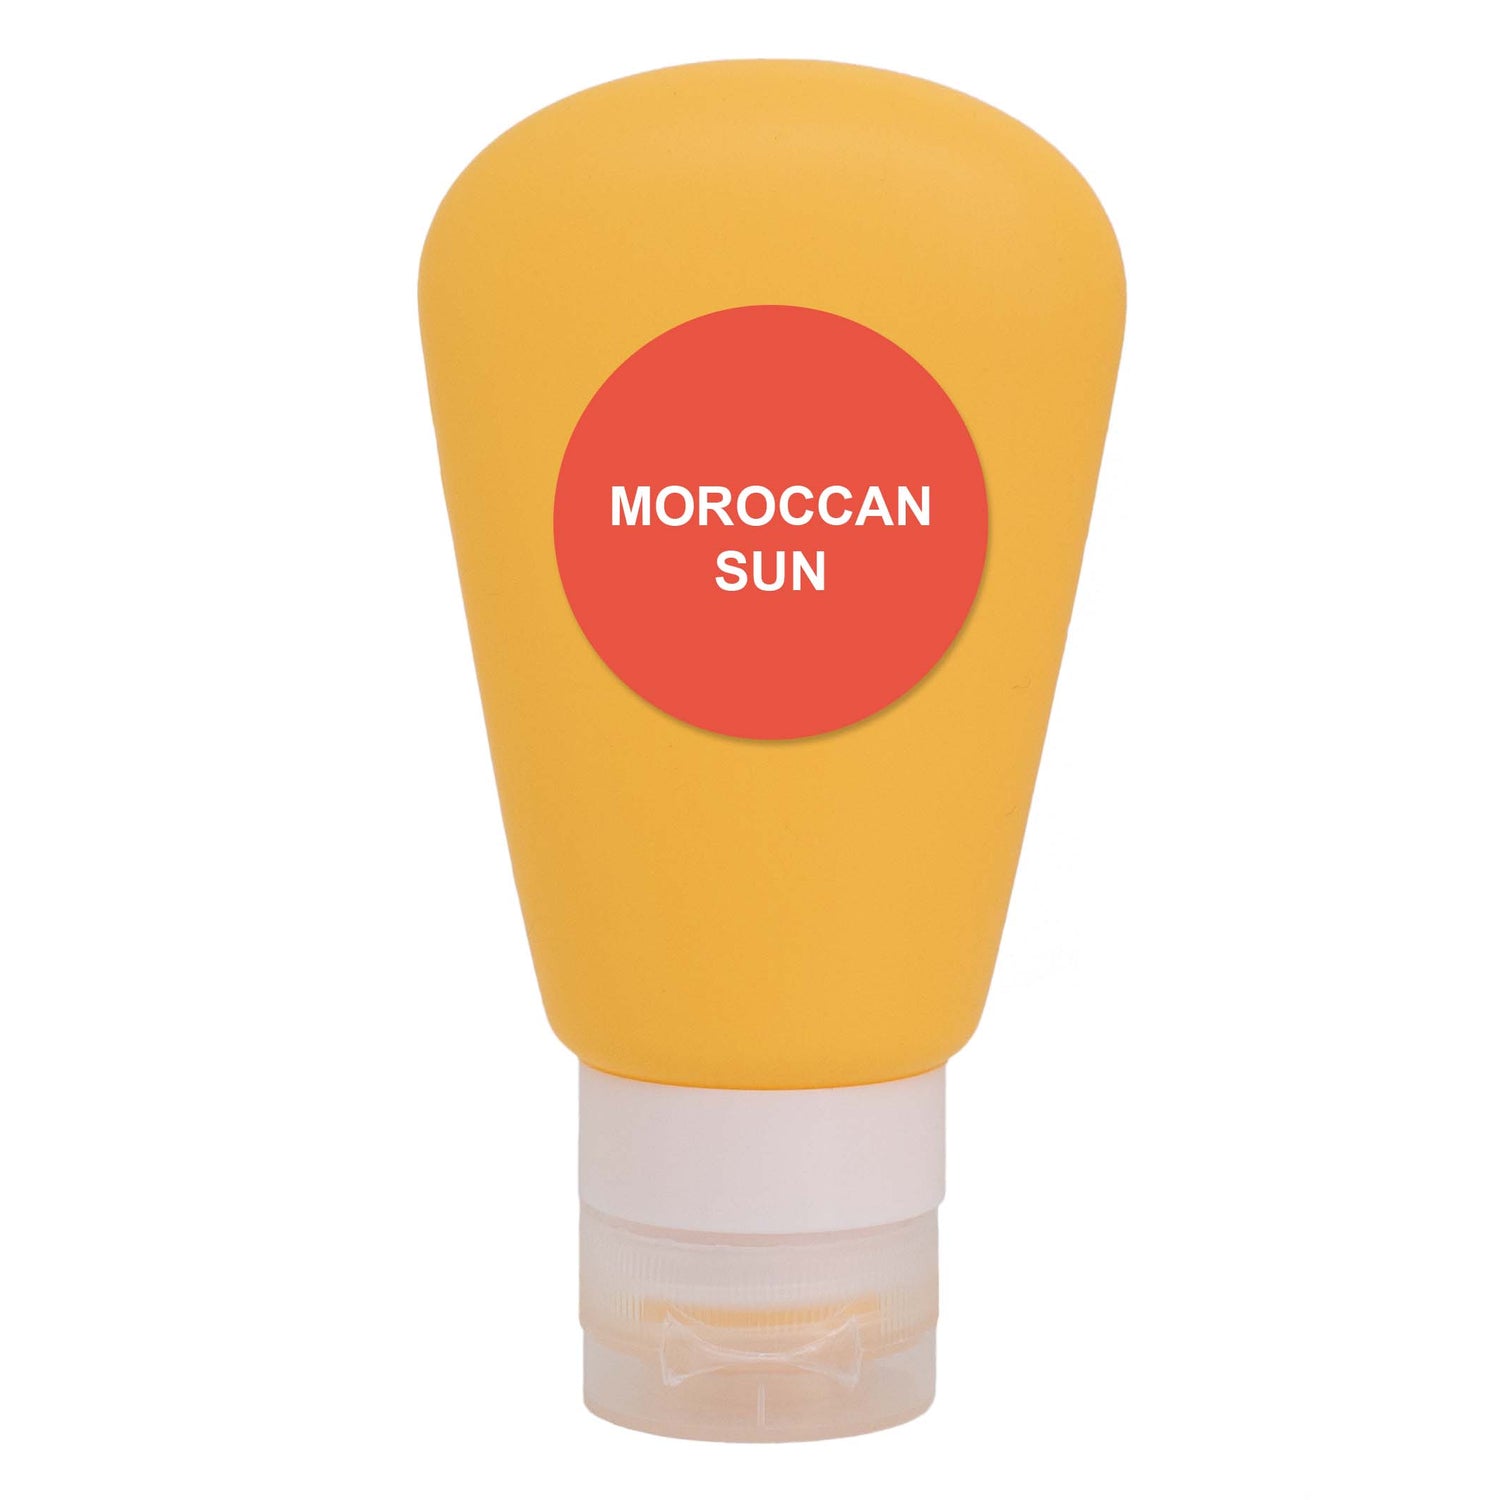 Miracle Butter Cream Squeeze Tube 3oz moroccan sun, miraclebuttercream.com